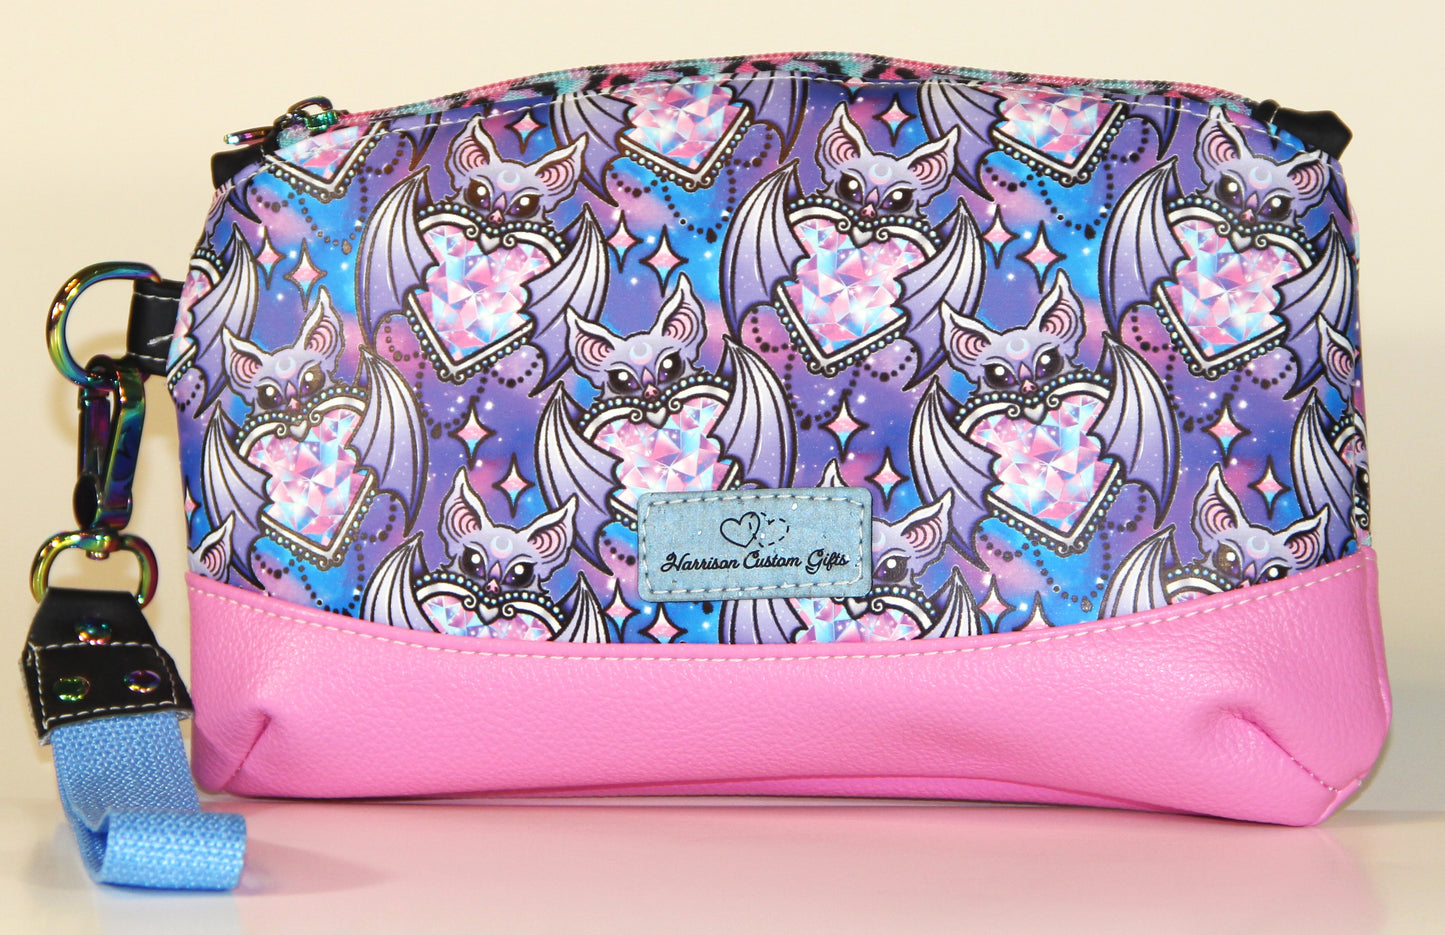 Battalion of Bejeweled Bats with Hearts-Clematis Wristlet